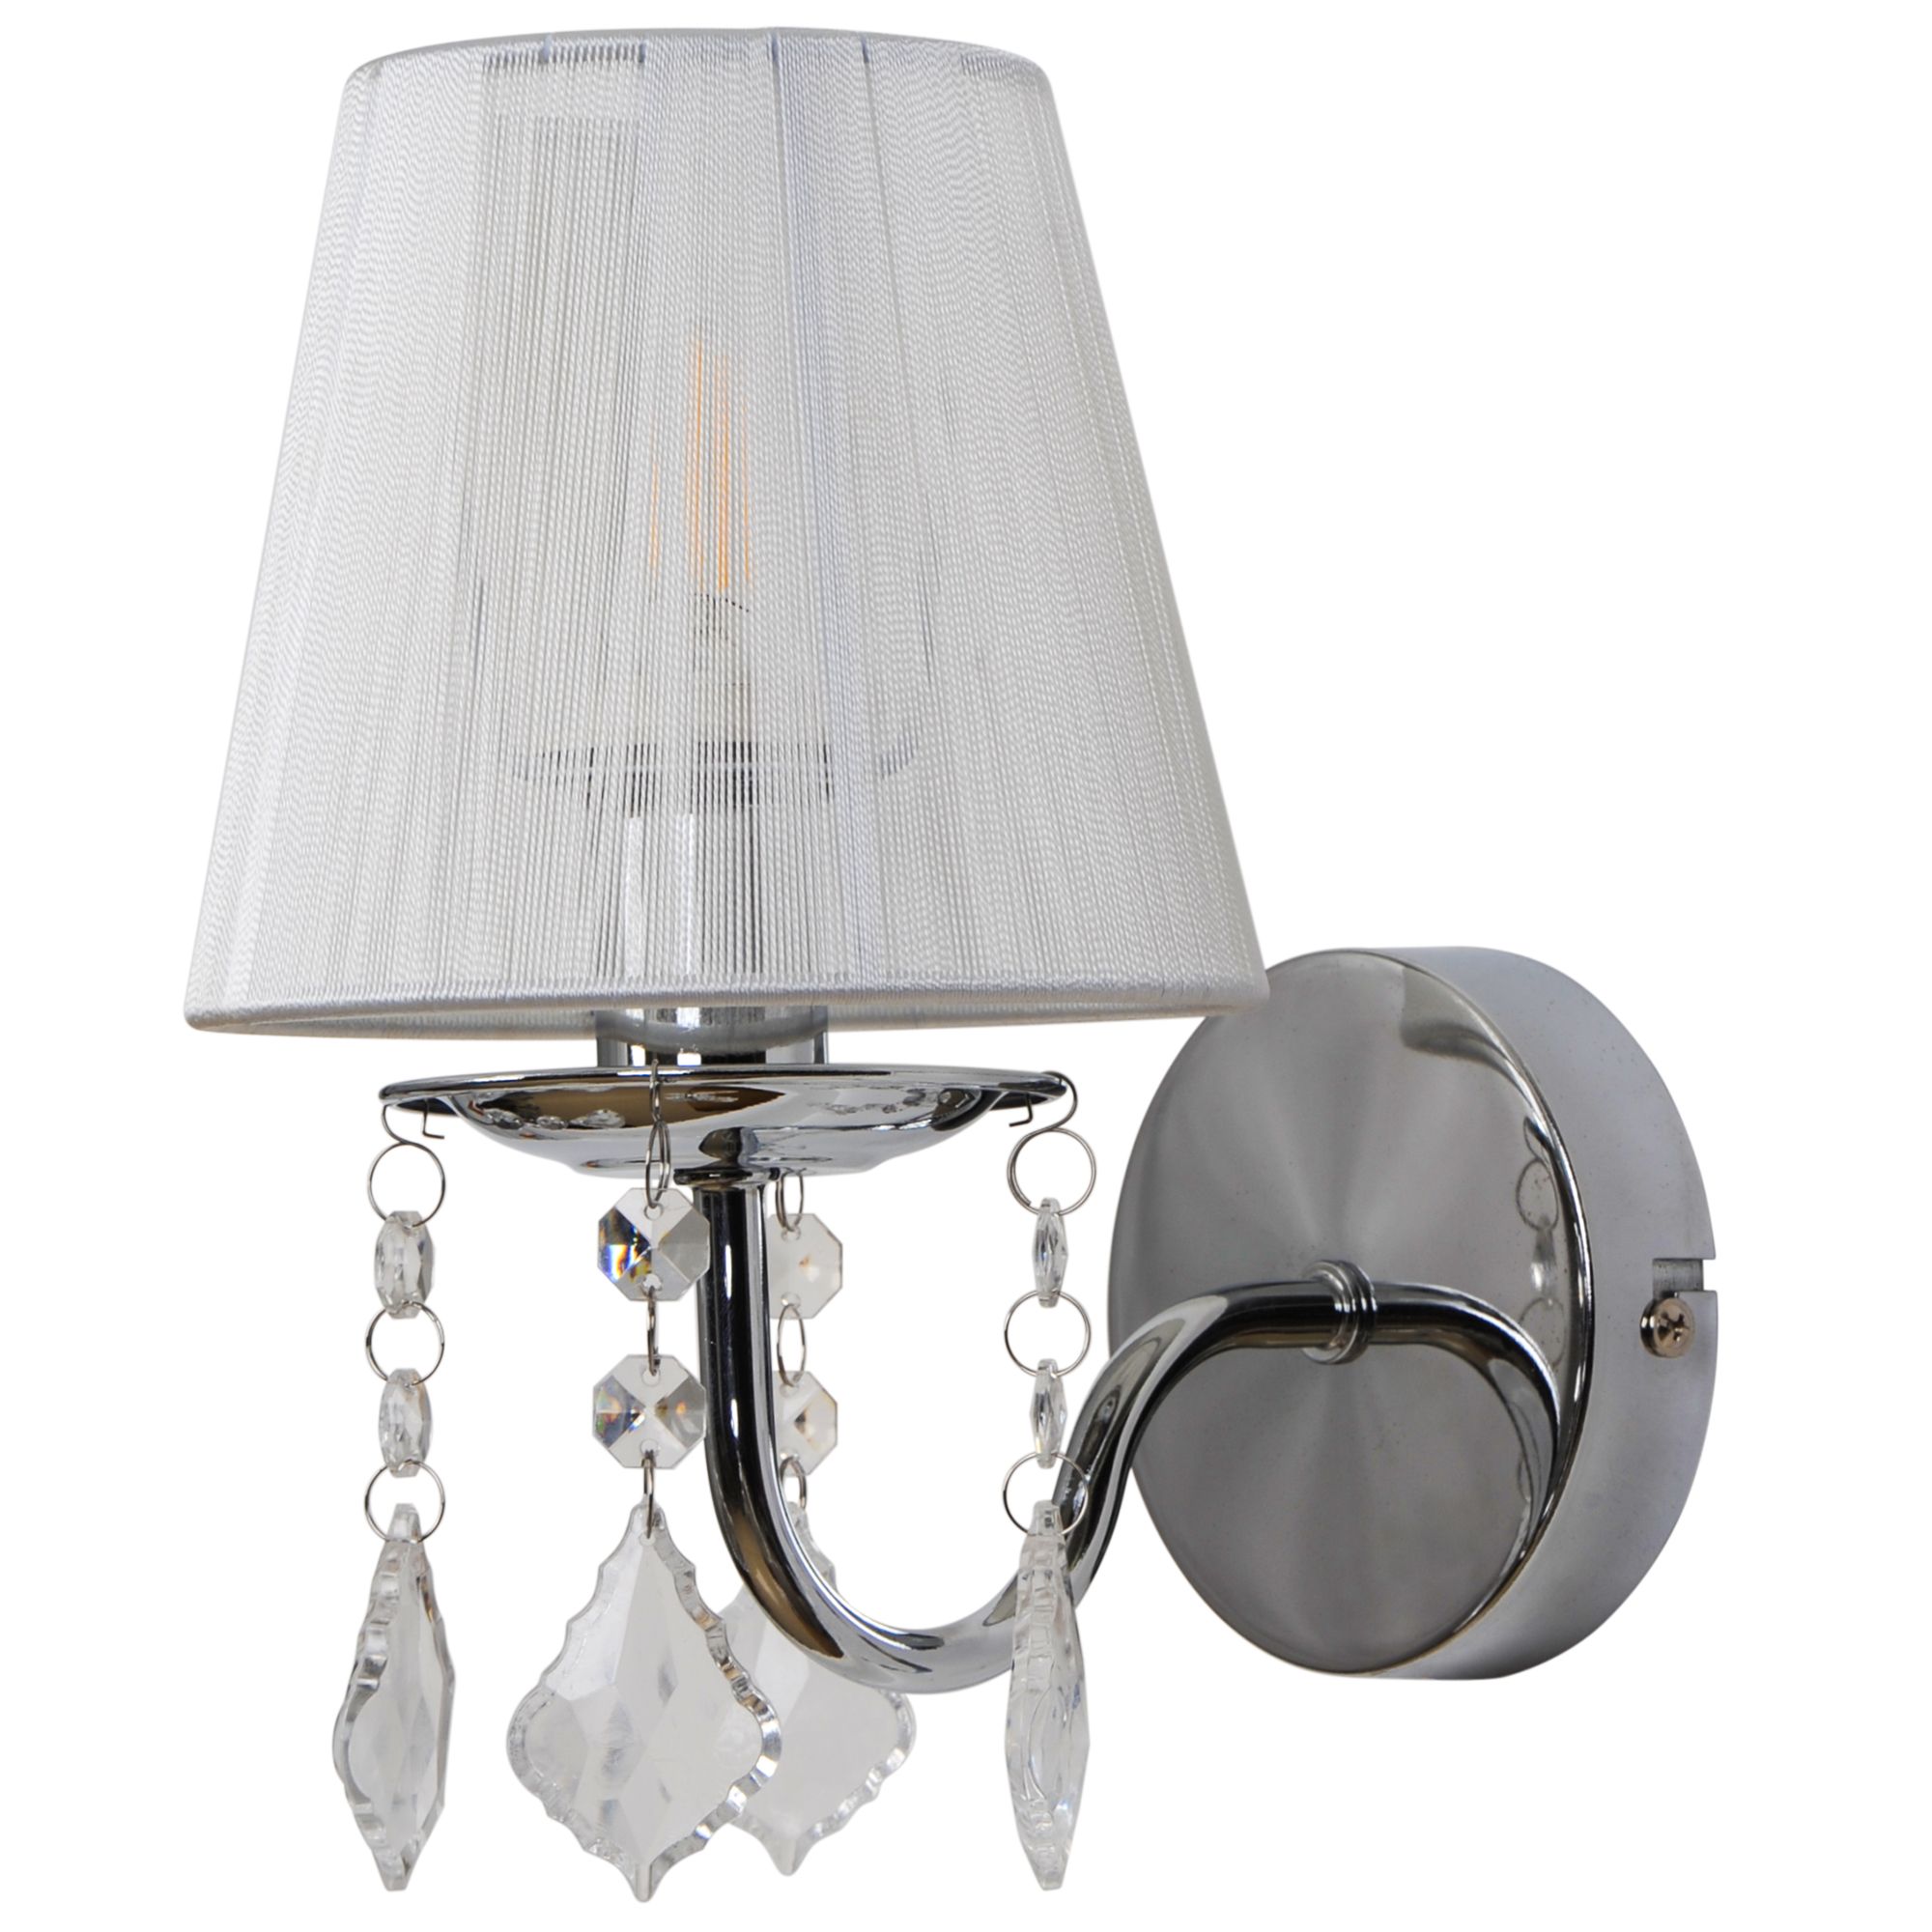 GoodHome Hovland Grey & white Chrome effect Wall light